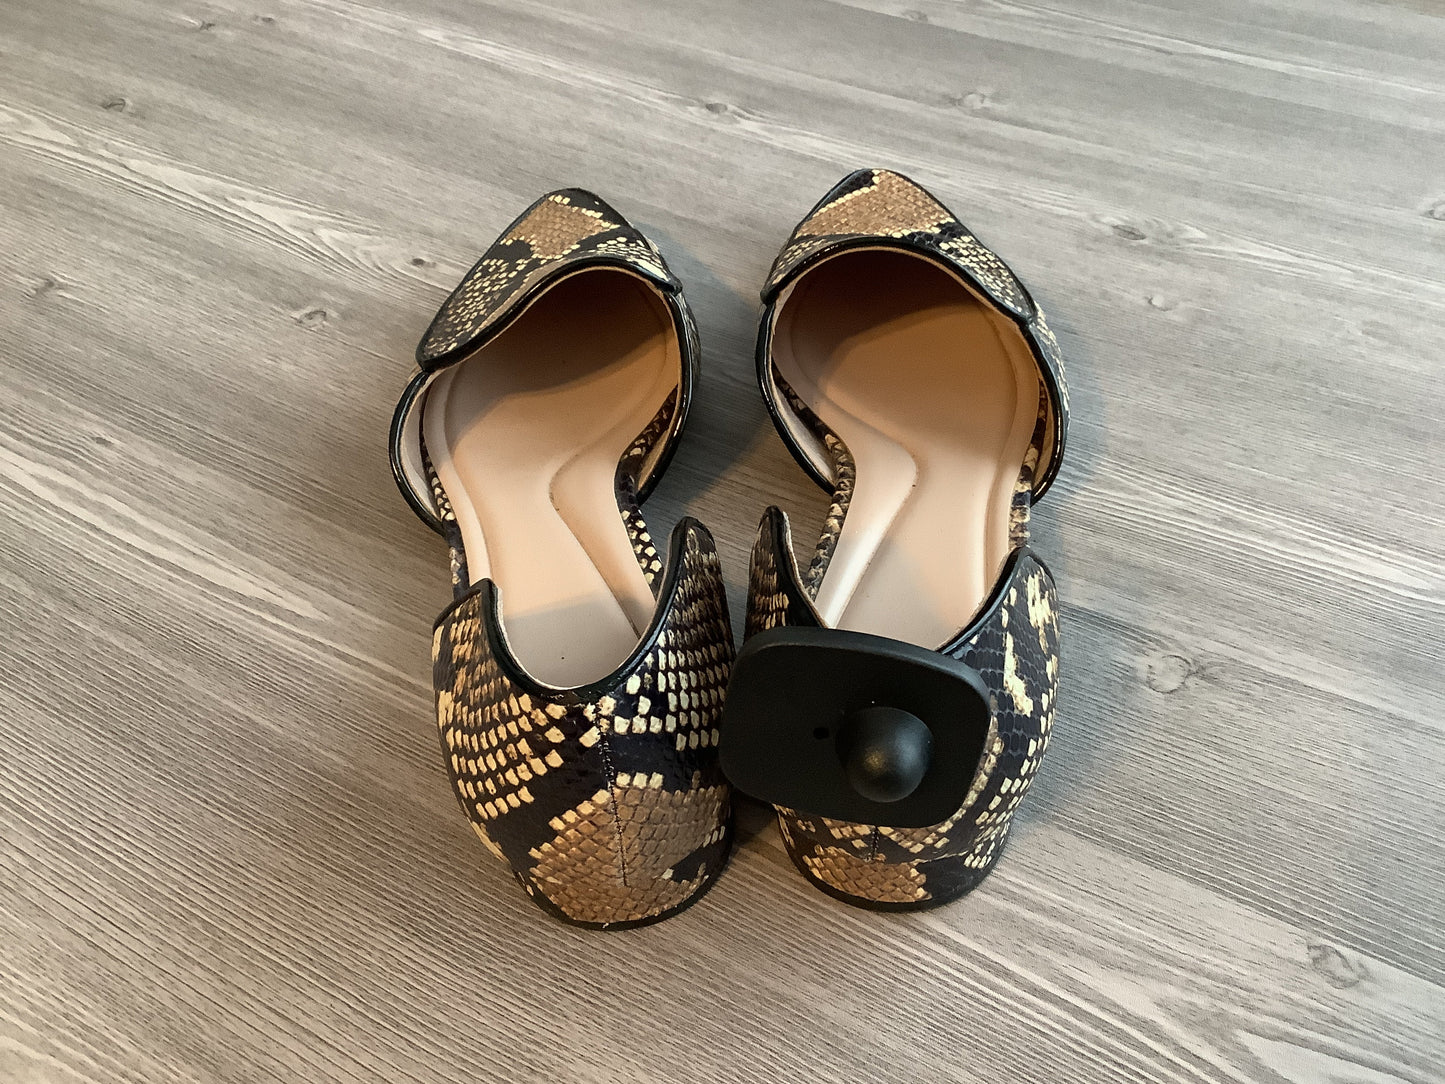 Shoes Flats By Preston And New York  Size: 10